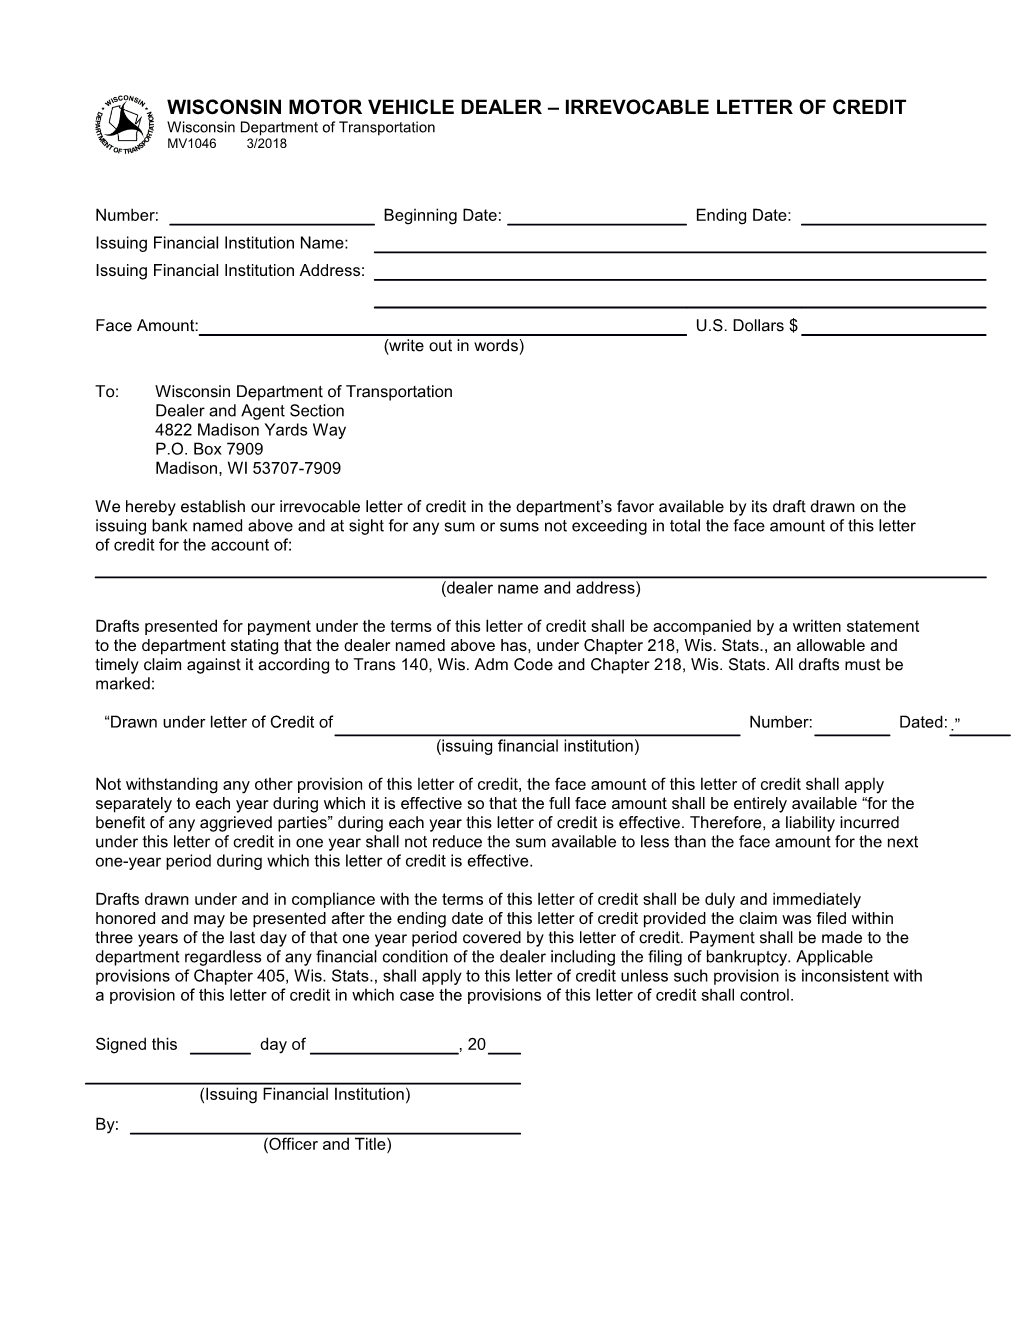 Wisconsin Motor Vehicle Dealer - Irrevocable Letter of Credit